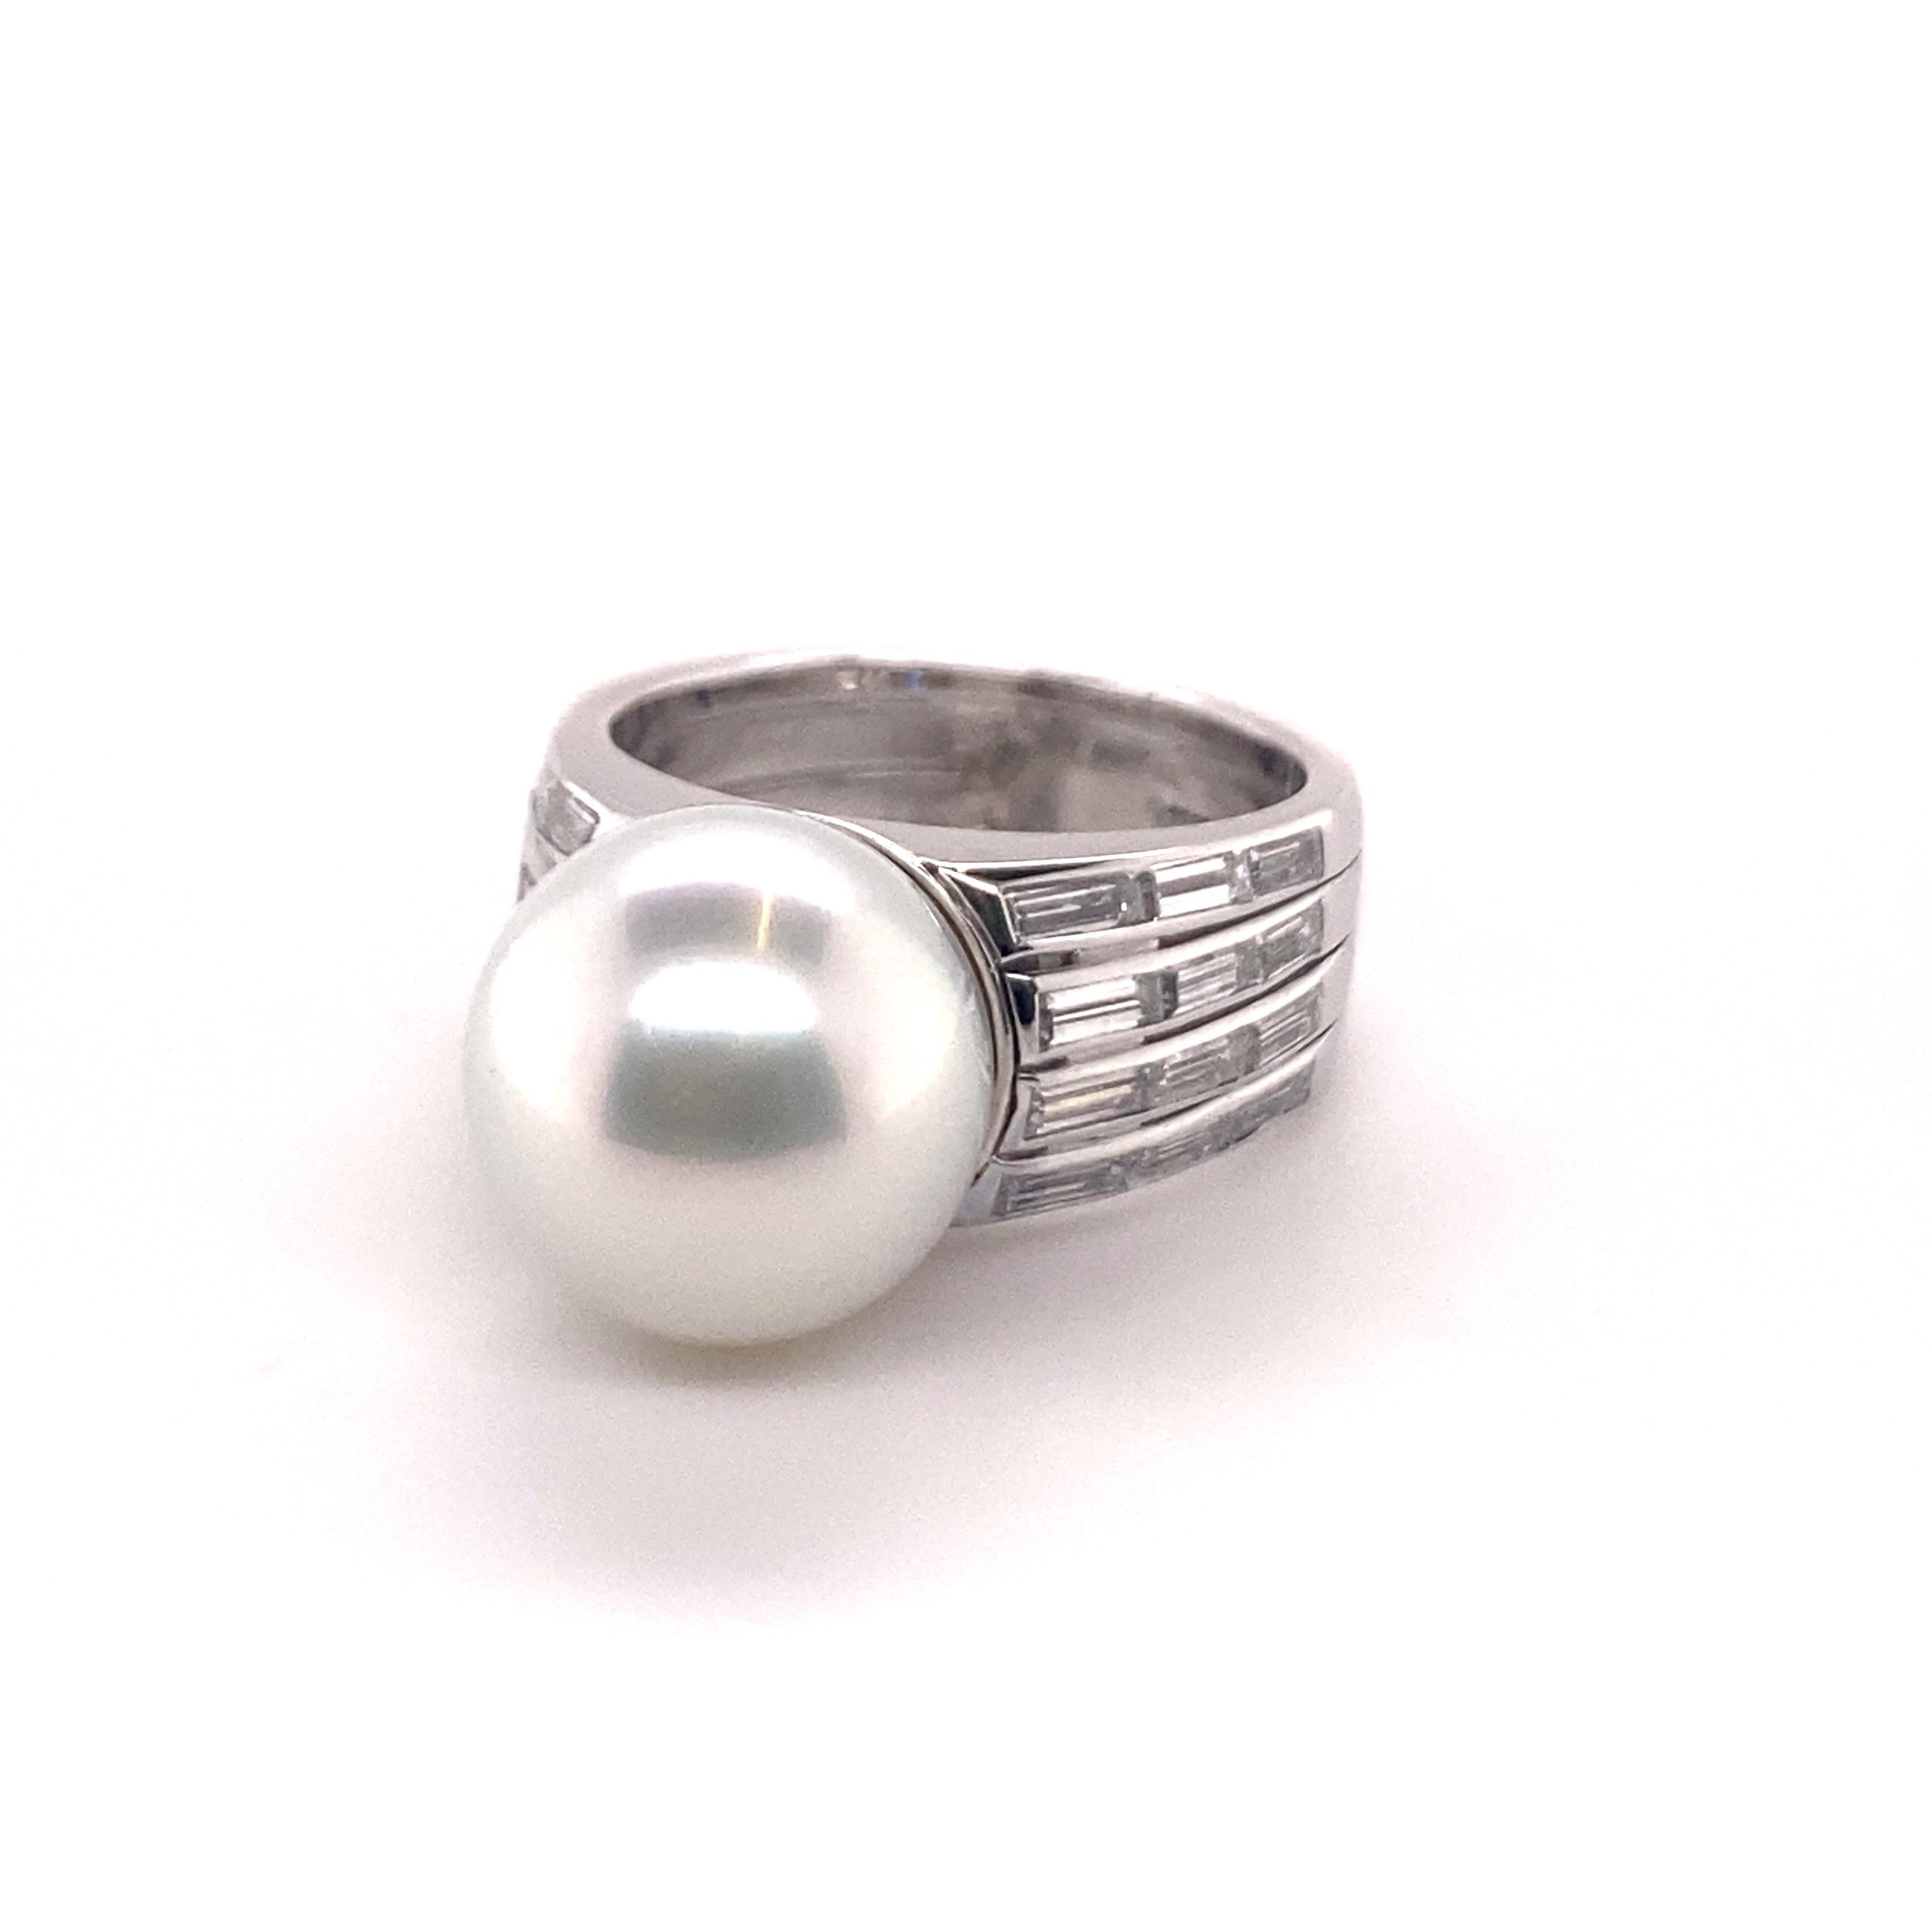 Beautifully worked ring in 18 karat White Gold. Center of attraction is 12.8 mm white cultured South Sea Pearl of gem quality. The pearl is perfectly round, absolutely free of blemishes combined with a very fine luster. The pearl is possessing a